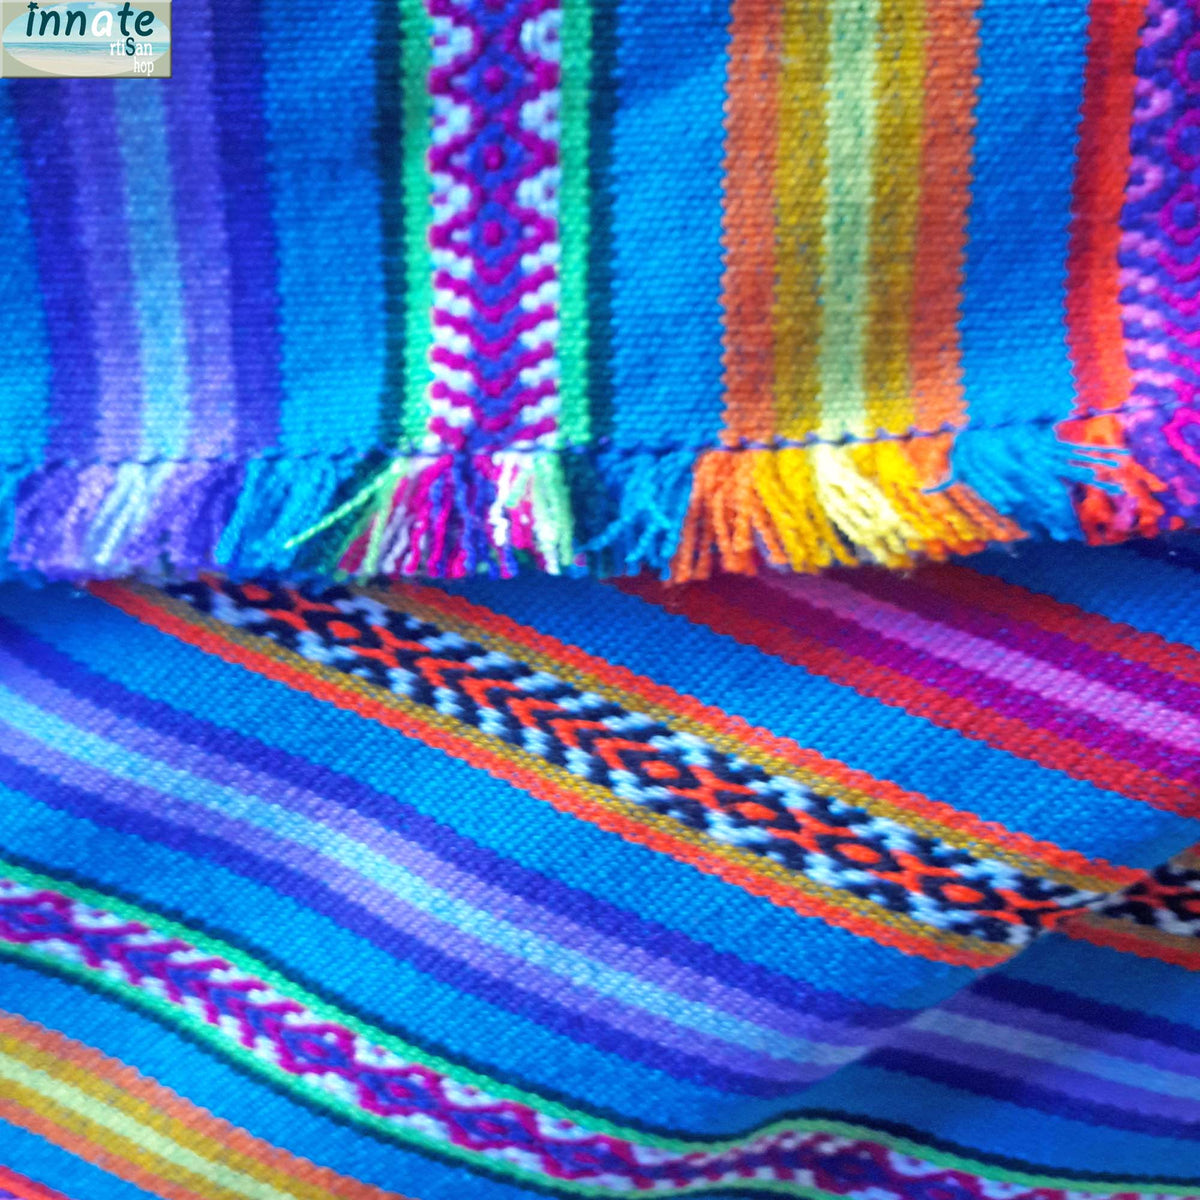 Andean blanket, turquoise, aguayo blanket, South America blanket, blue, turquoise